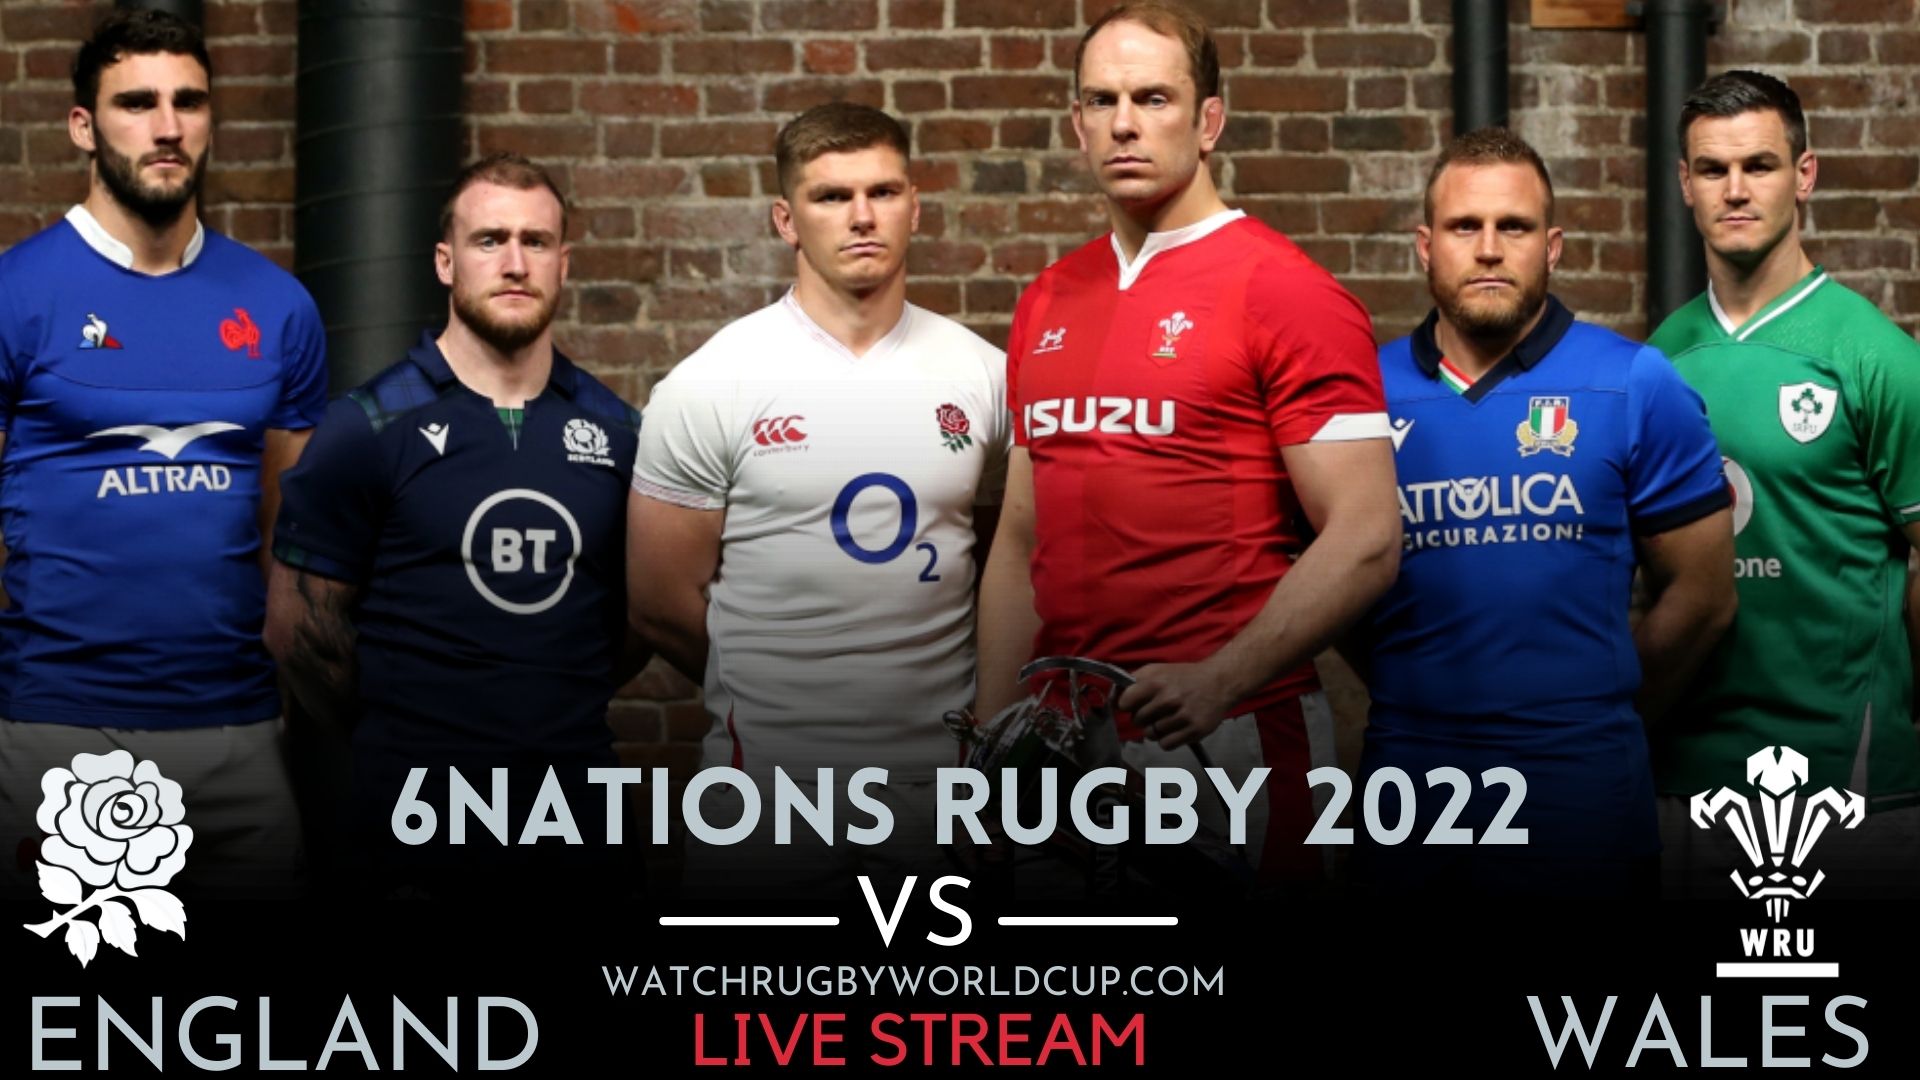 England Vs Wales Live Stream 2022 Rd 3 | Full Match Replay